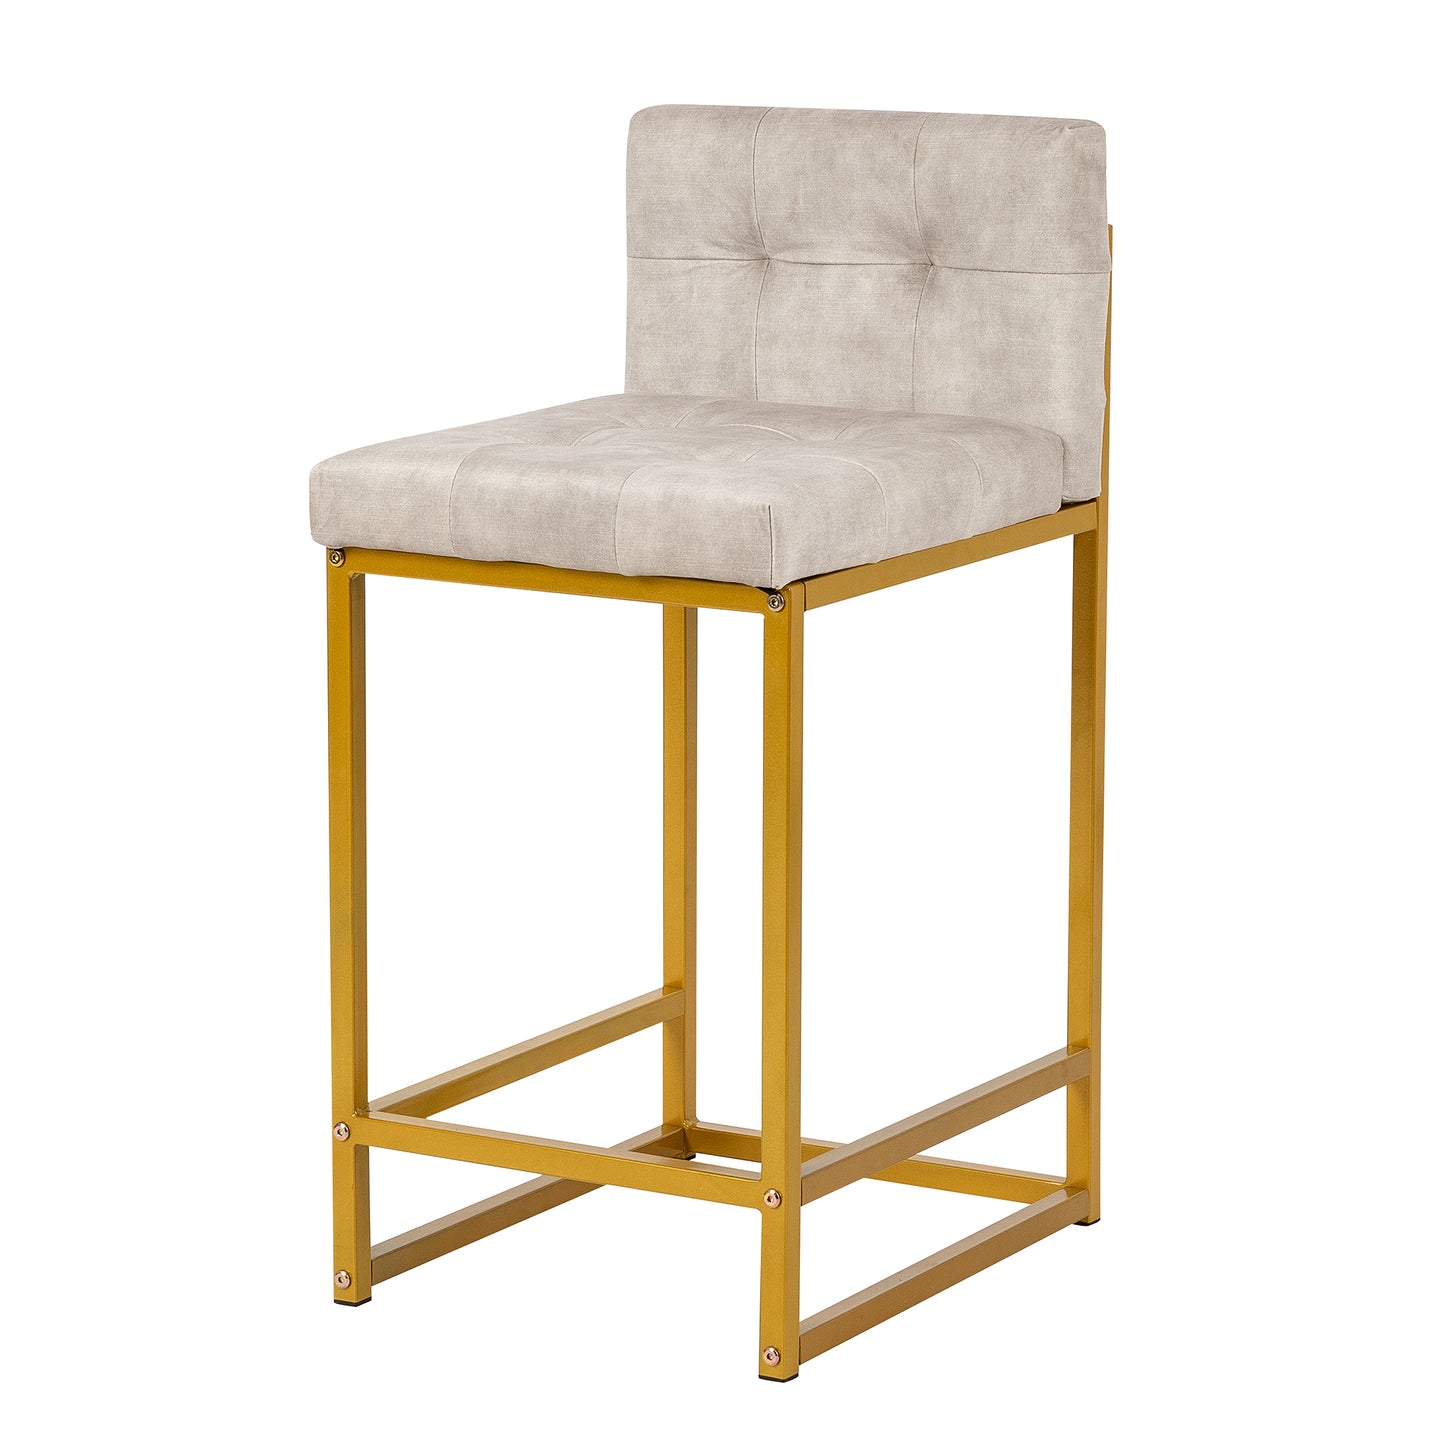 Stainless Steel Upholstered Fabric Counter Stool,Beige